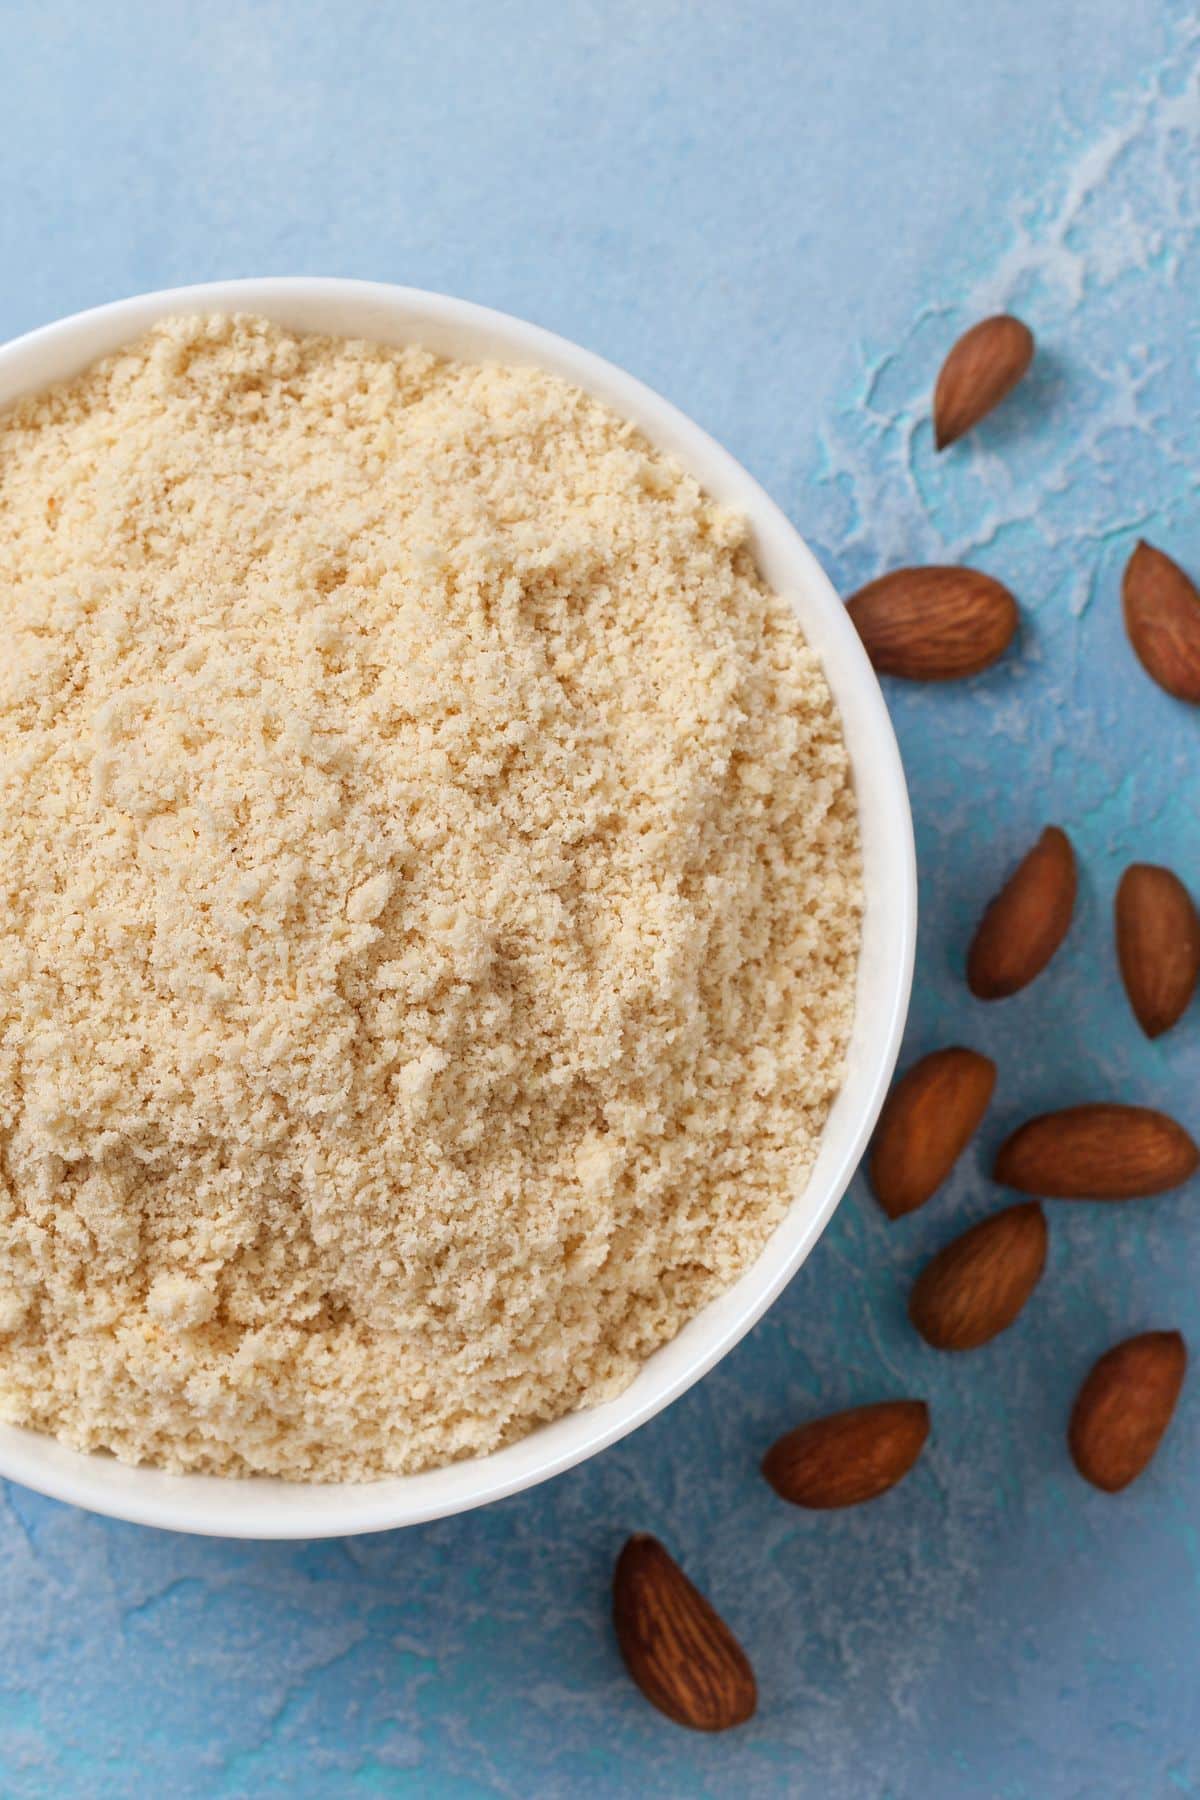 Bowl of almond meal with whole almonds.